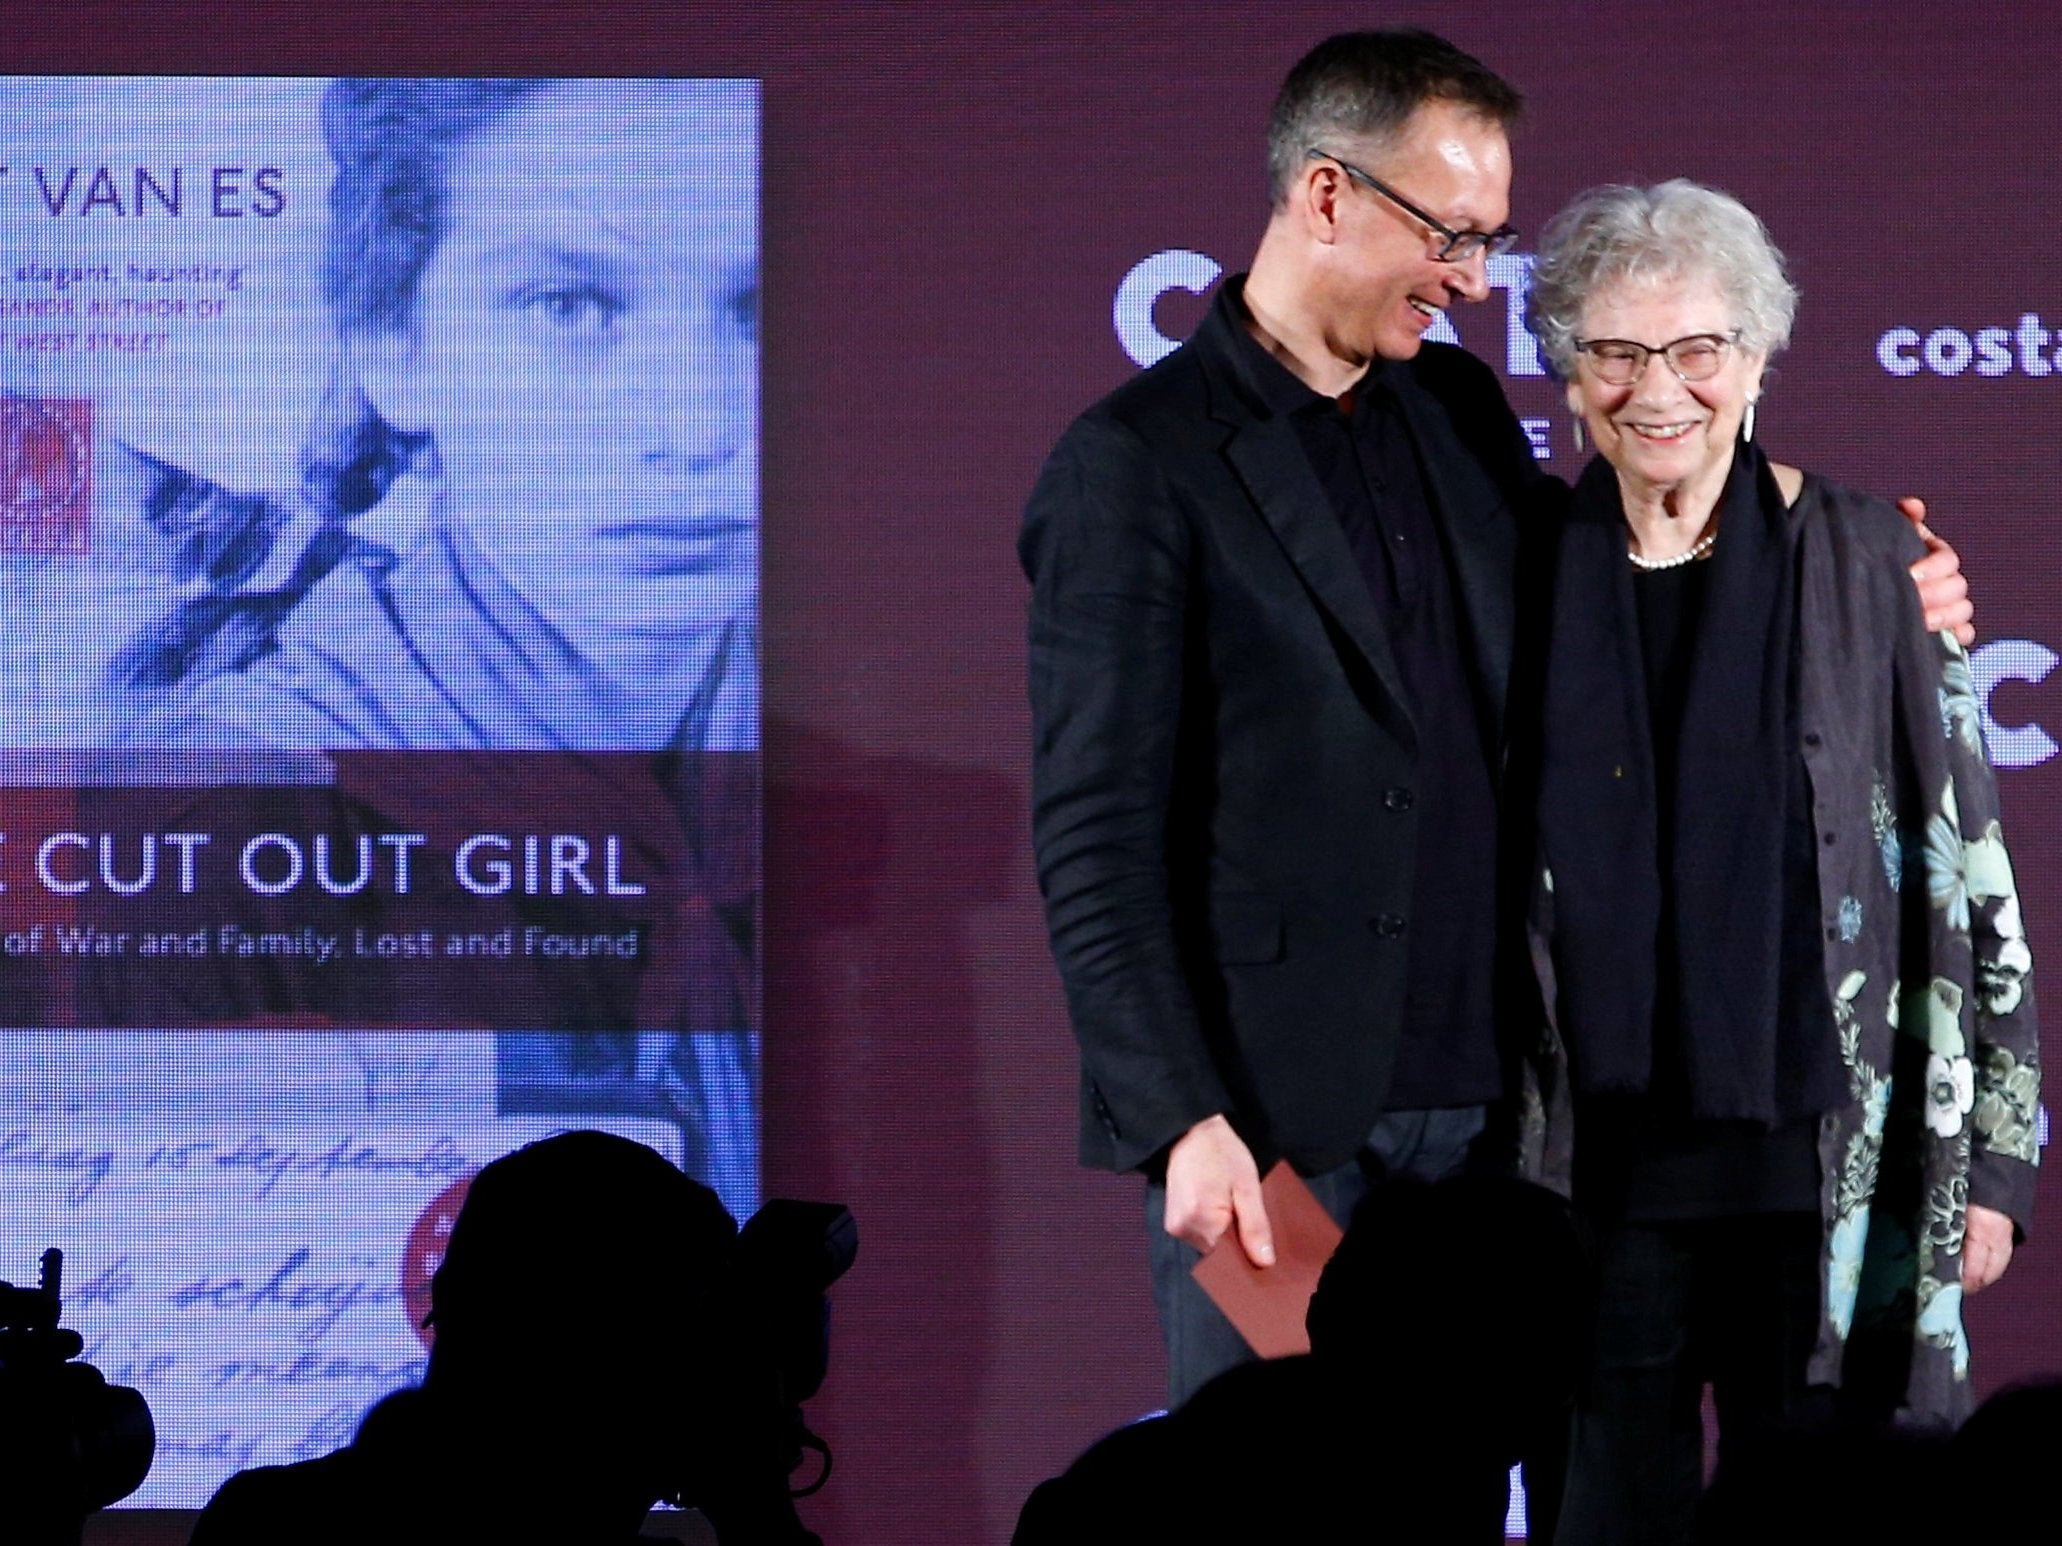 Bart van Es, author of the book 'The Cut Out Girl', embraces the subject of his book Lien de Jong during the Costa Book of the Year Award ceremony in London